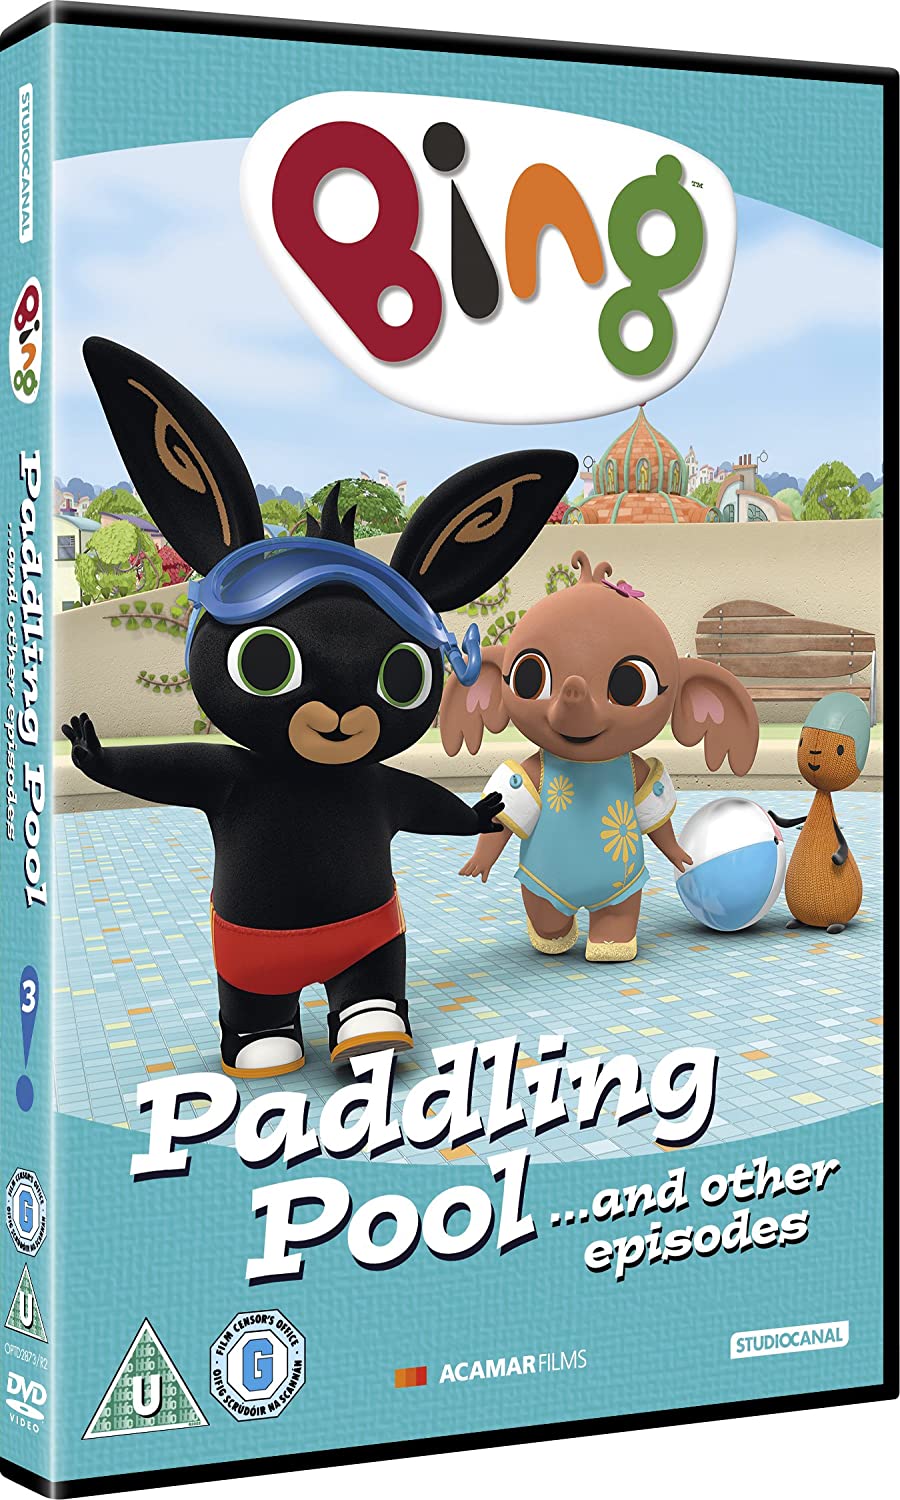 Bing - Paddling Pool And Other Episodes [DVD]